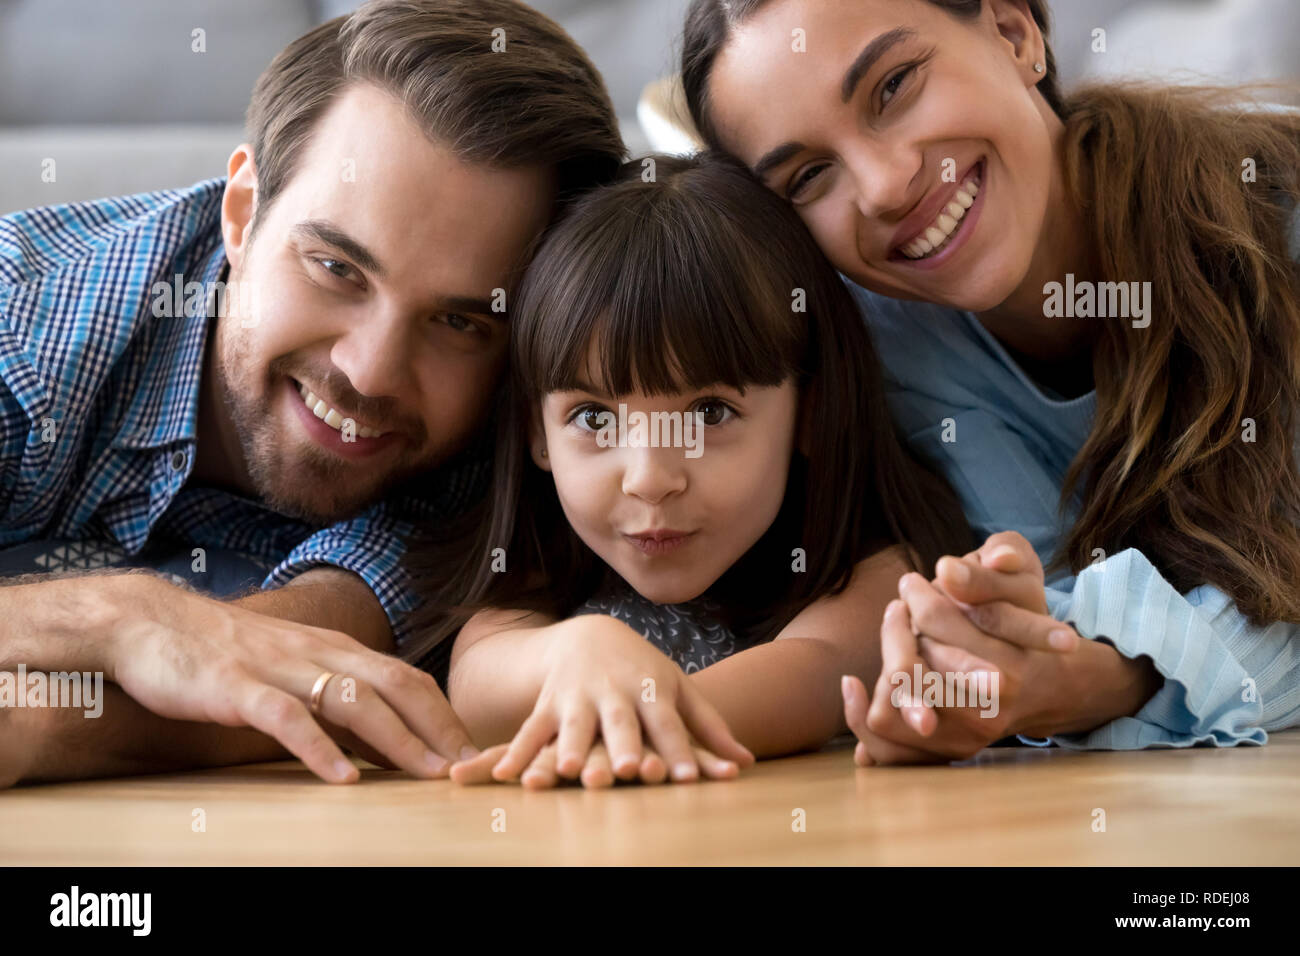 Funny cute little daughter lying on warm floor with parents, por Stock Photo